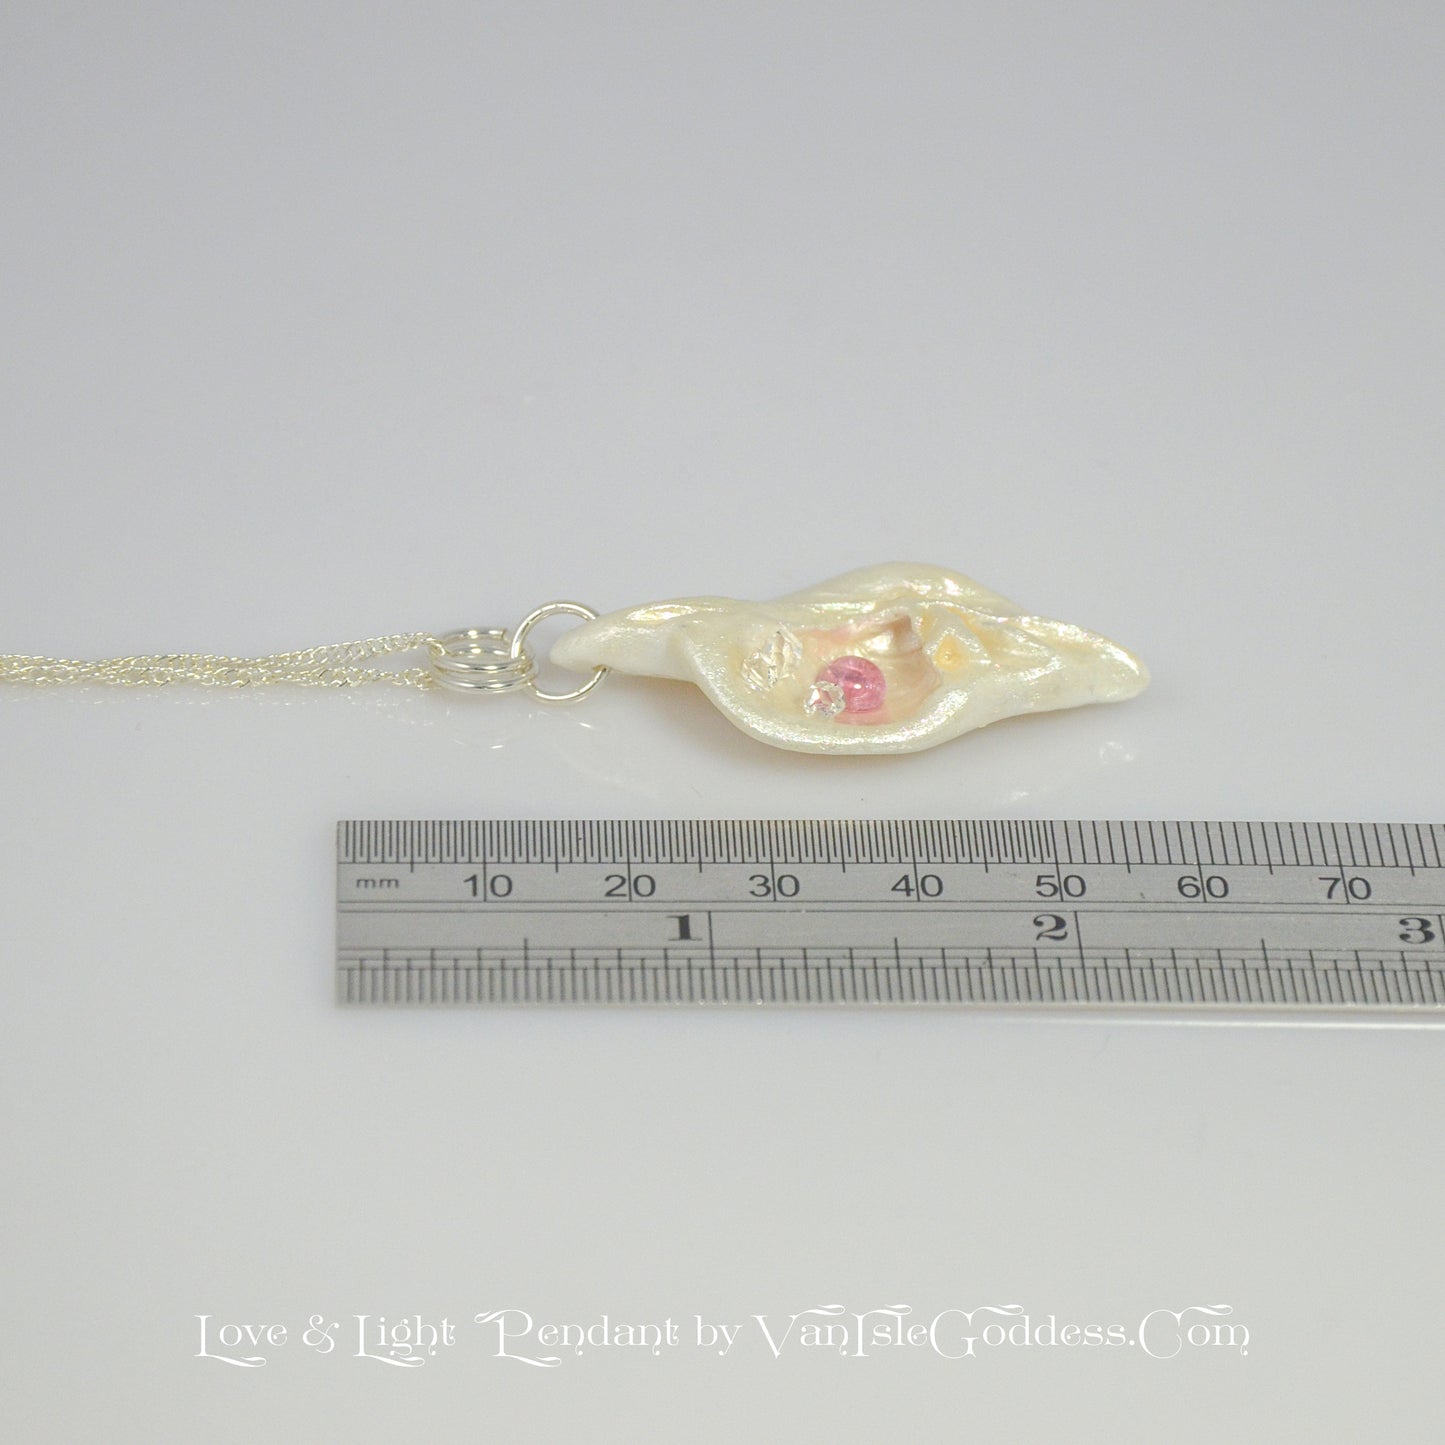 This natural seashell pendant has Pink Tourmaline gemstone and three Herkimer Diamonds that compliments the pendant. The pendant is shown along side a ruler so the viewer can see the length of the pendant.